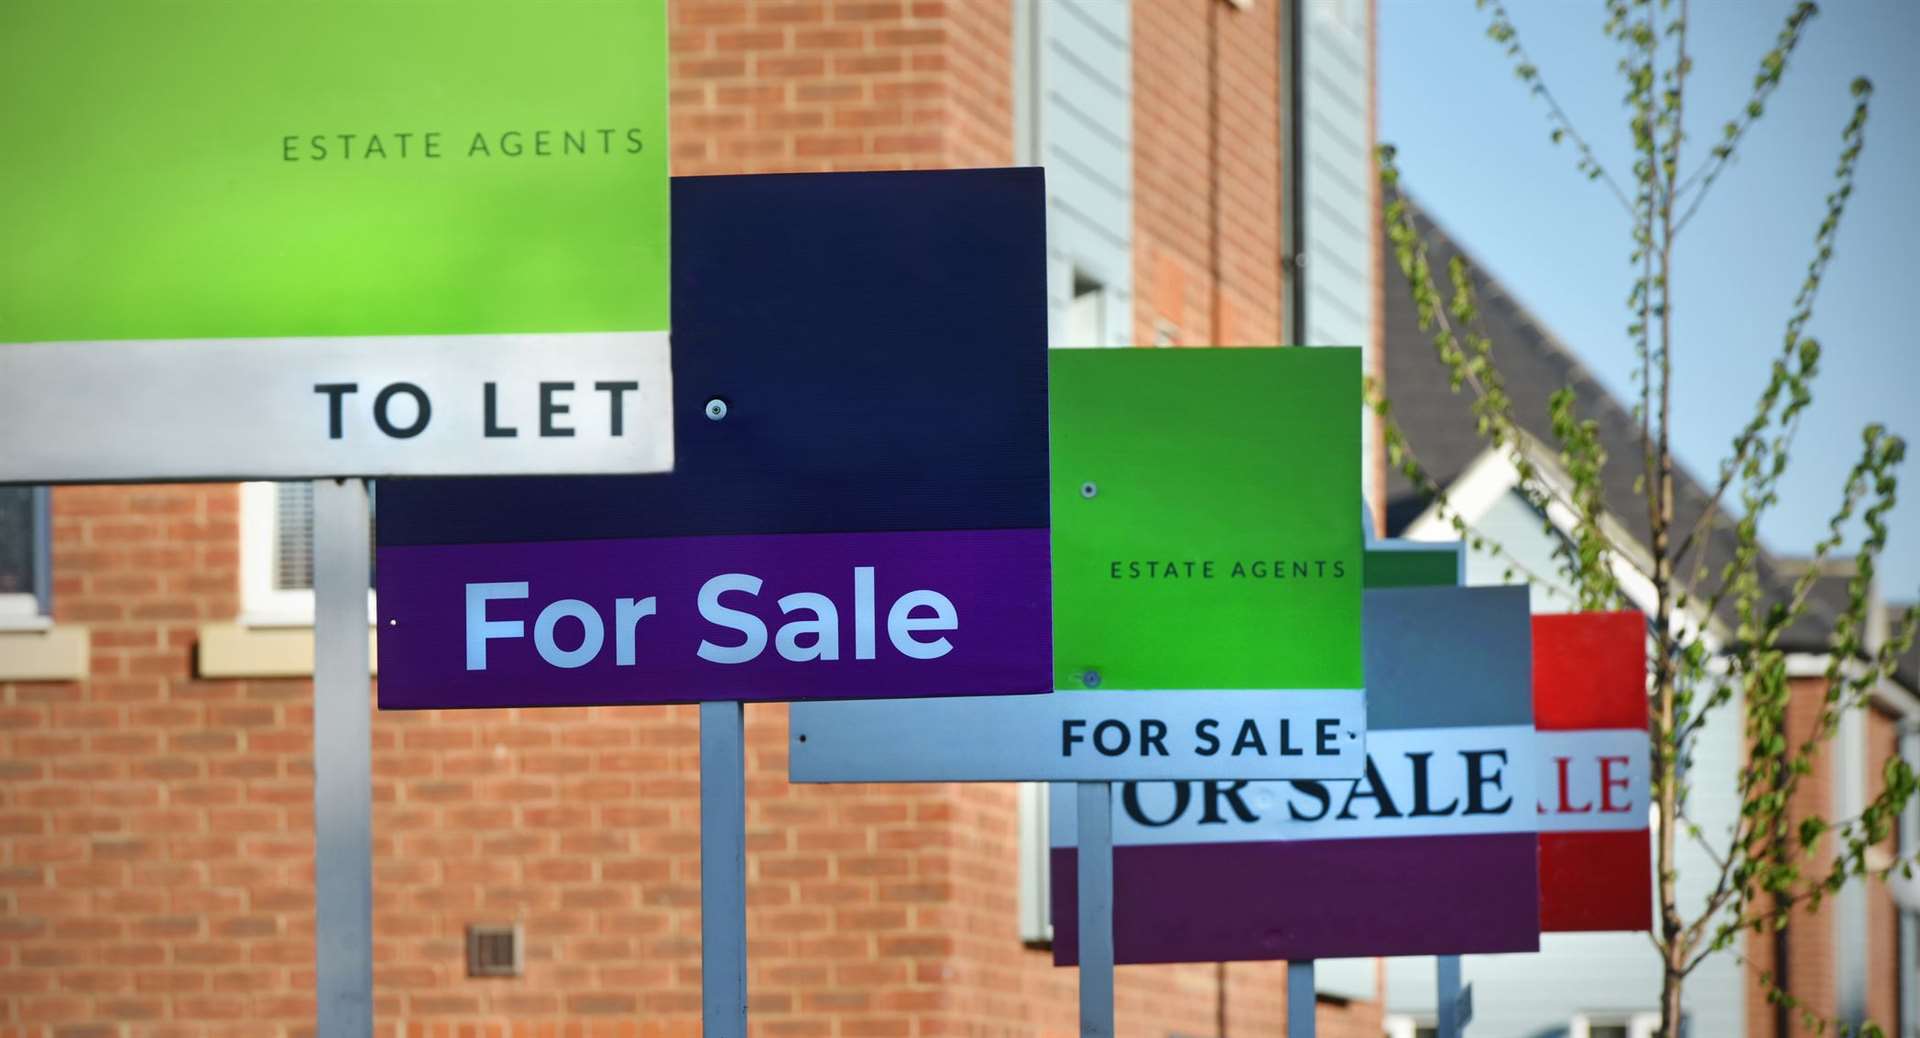 The average house price in the county is £414,420